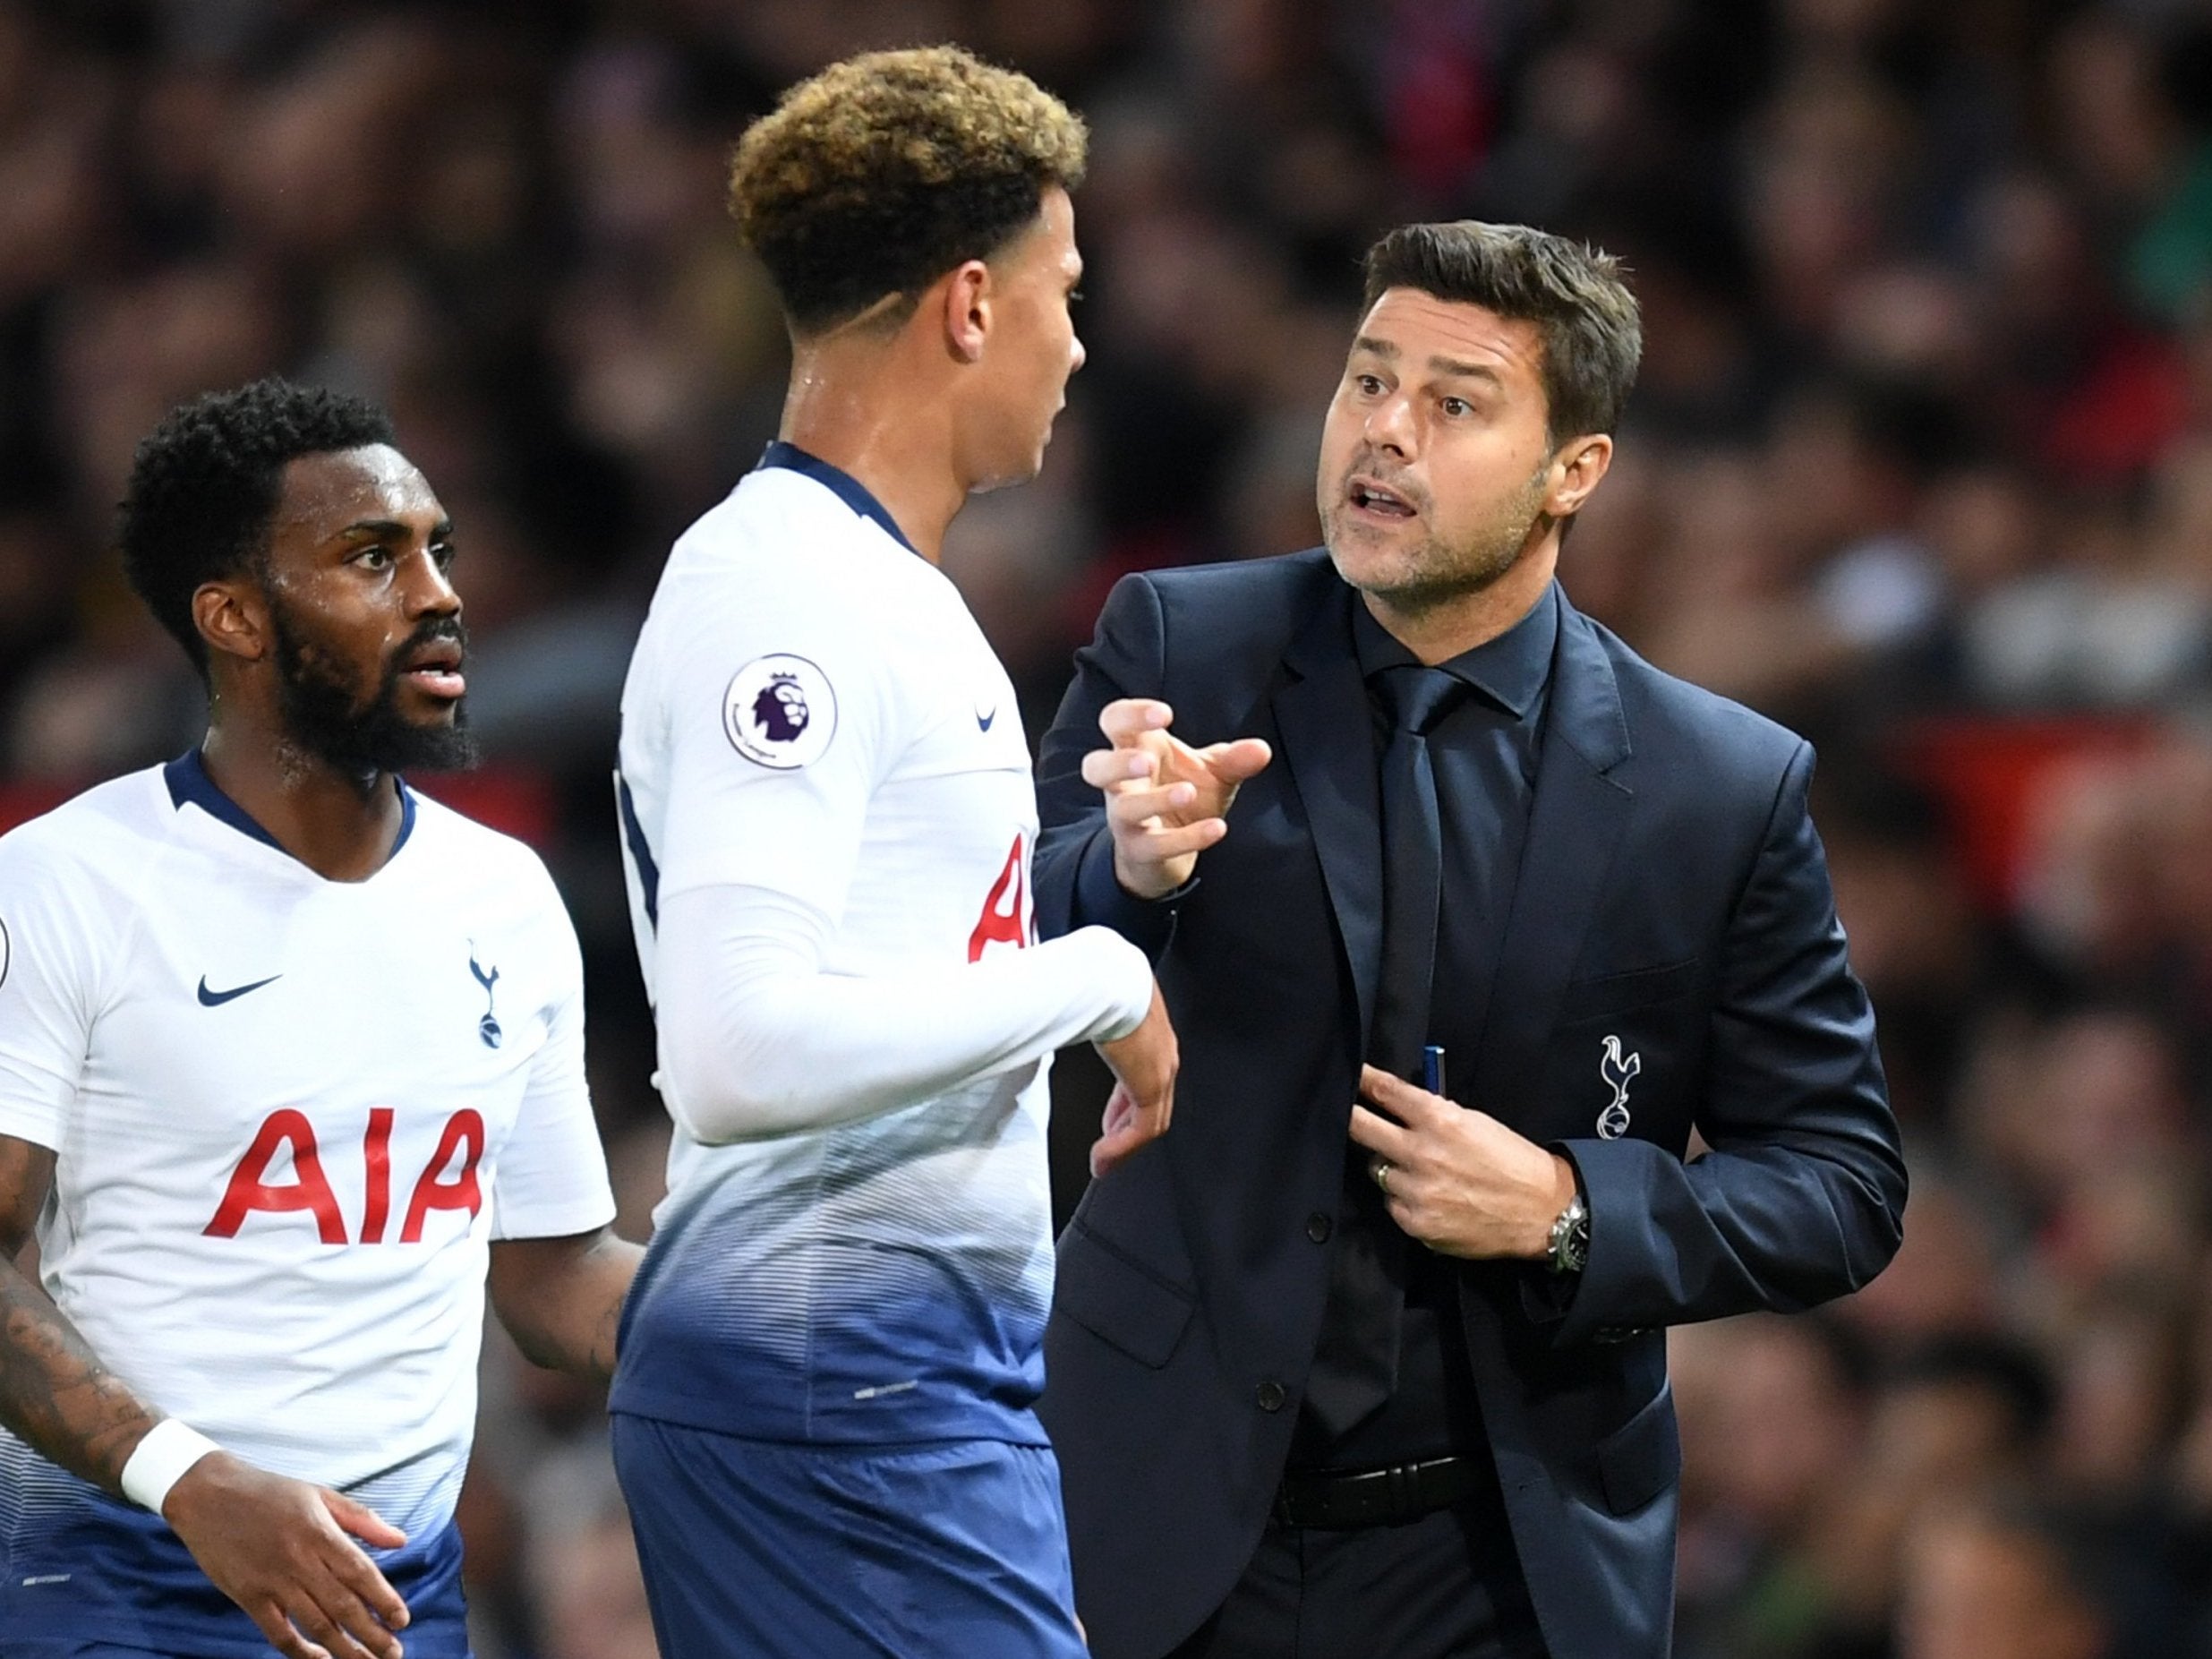 Tottenham will be looking to build upon last weekend's win over Brighton